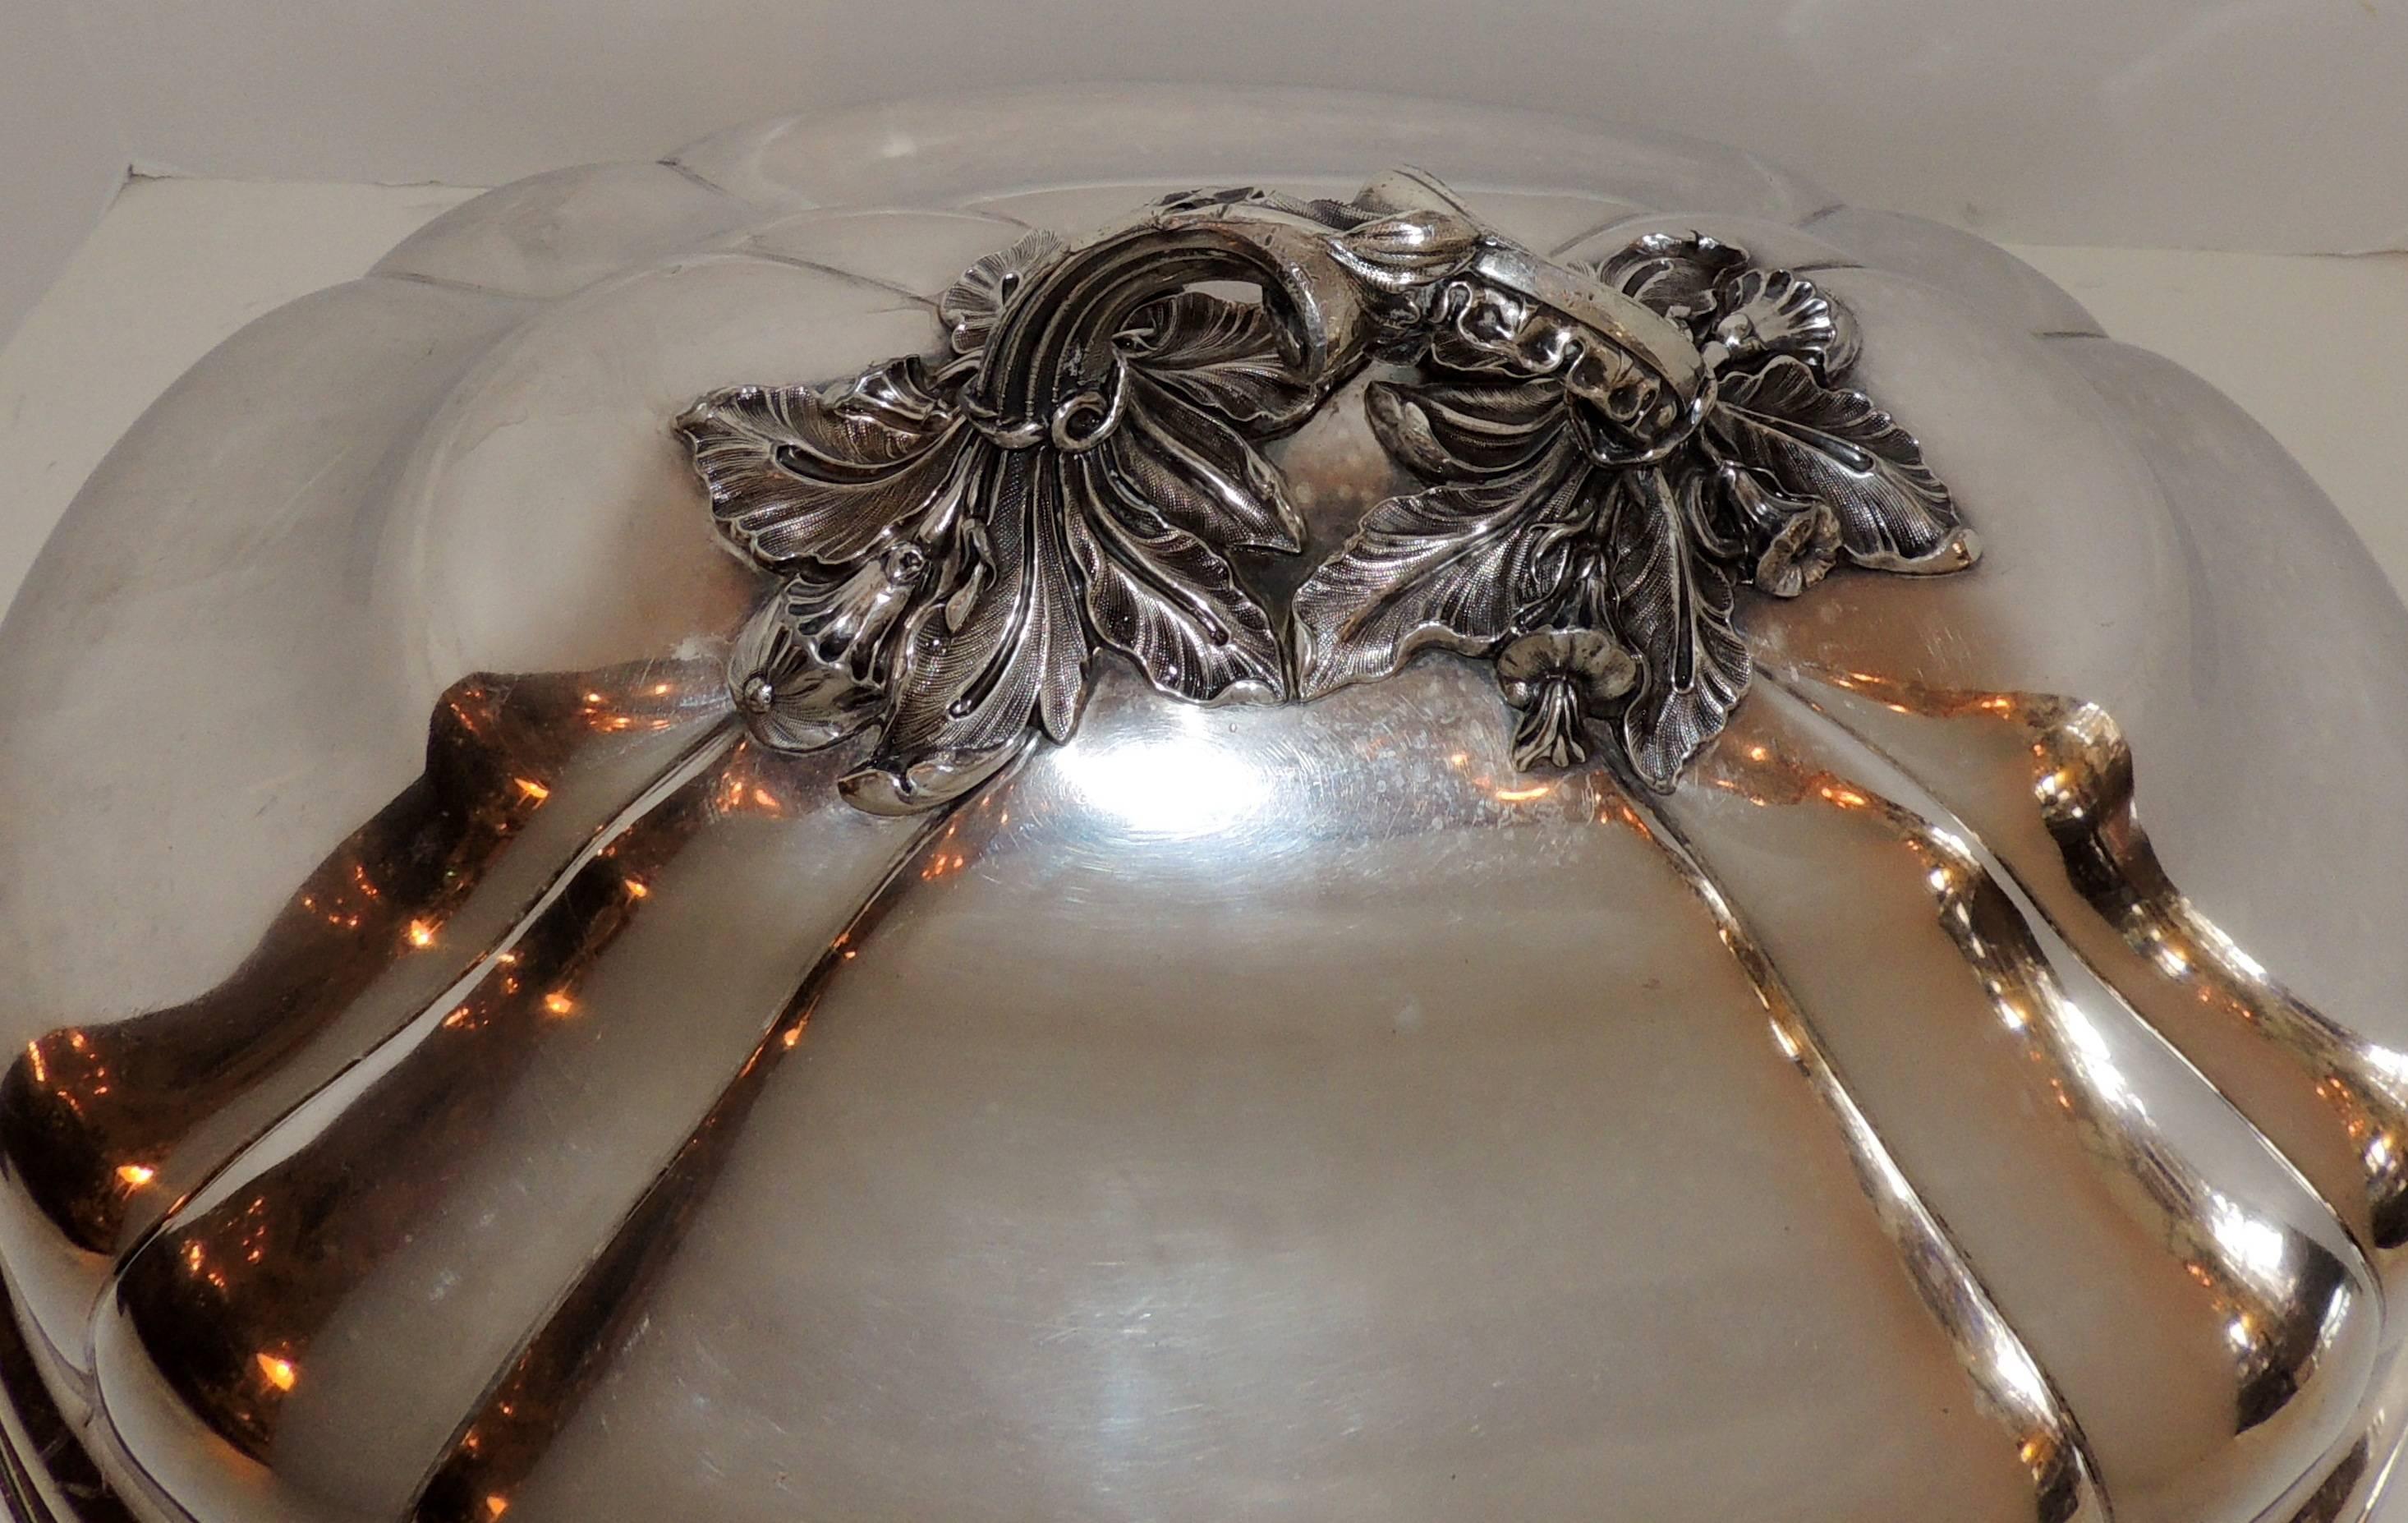 A rare and wonderful silver plated extra large antique serving meat food turkey dome / cover, in the Victorian style with a beautiful intricate handle. Finished with a wonderful lion crest on one side.